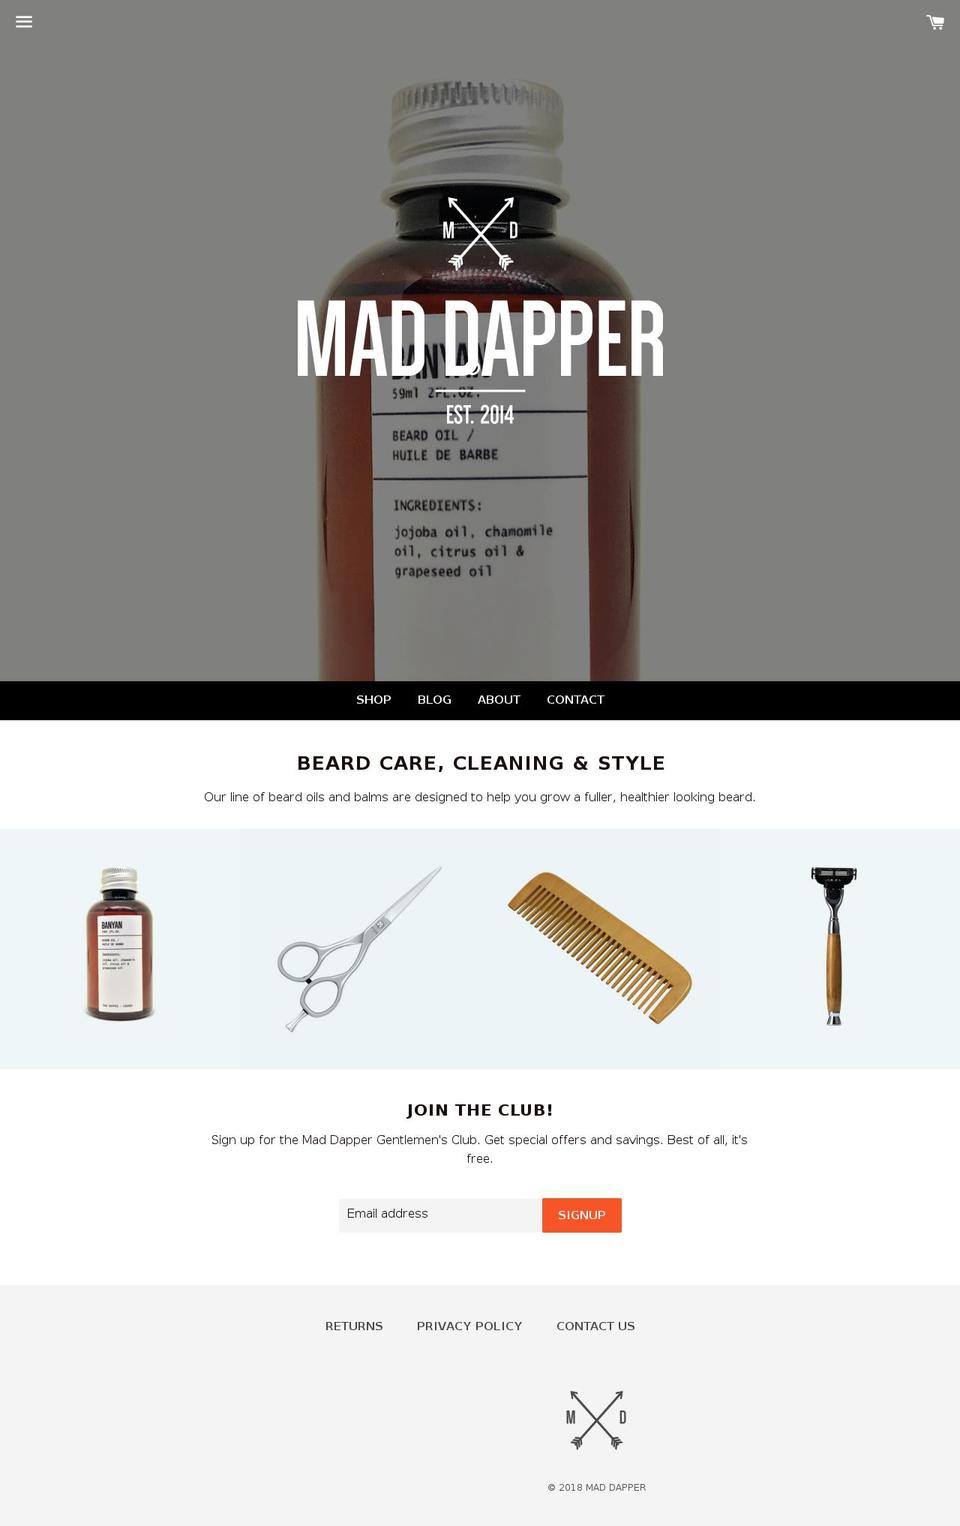 Copy of Boundless Shopify theme site example maddapper.com